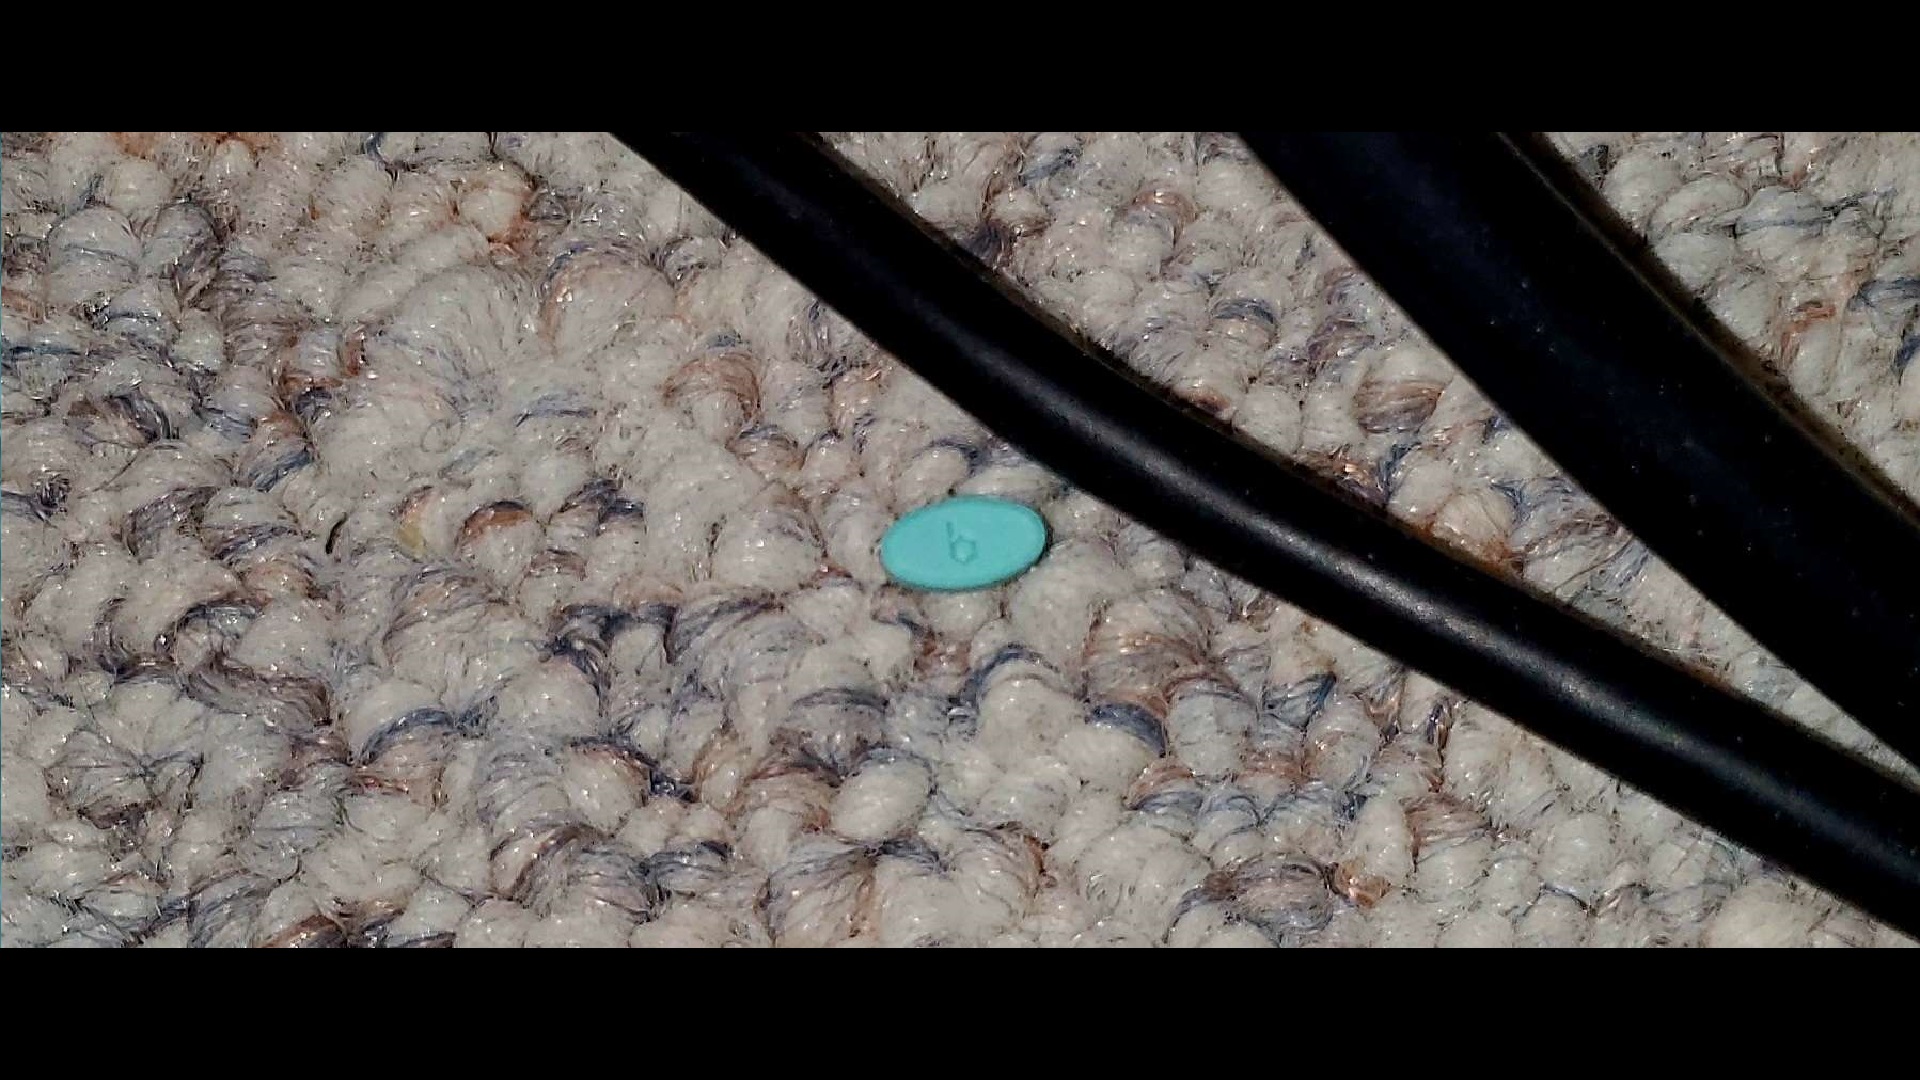 a small, oval shaped uncoated estrogen pill dropped on the carpet, below a few stray cords